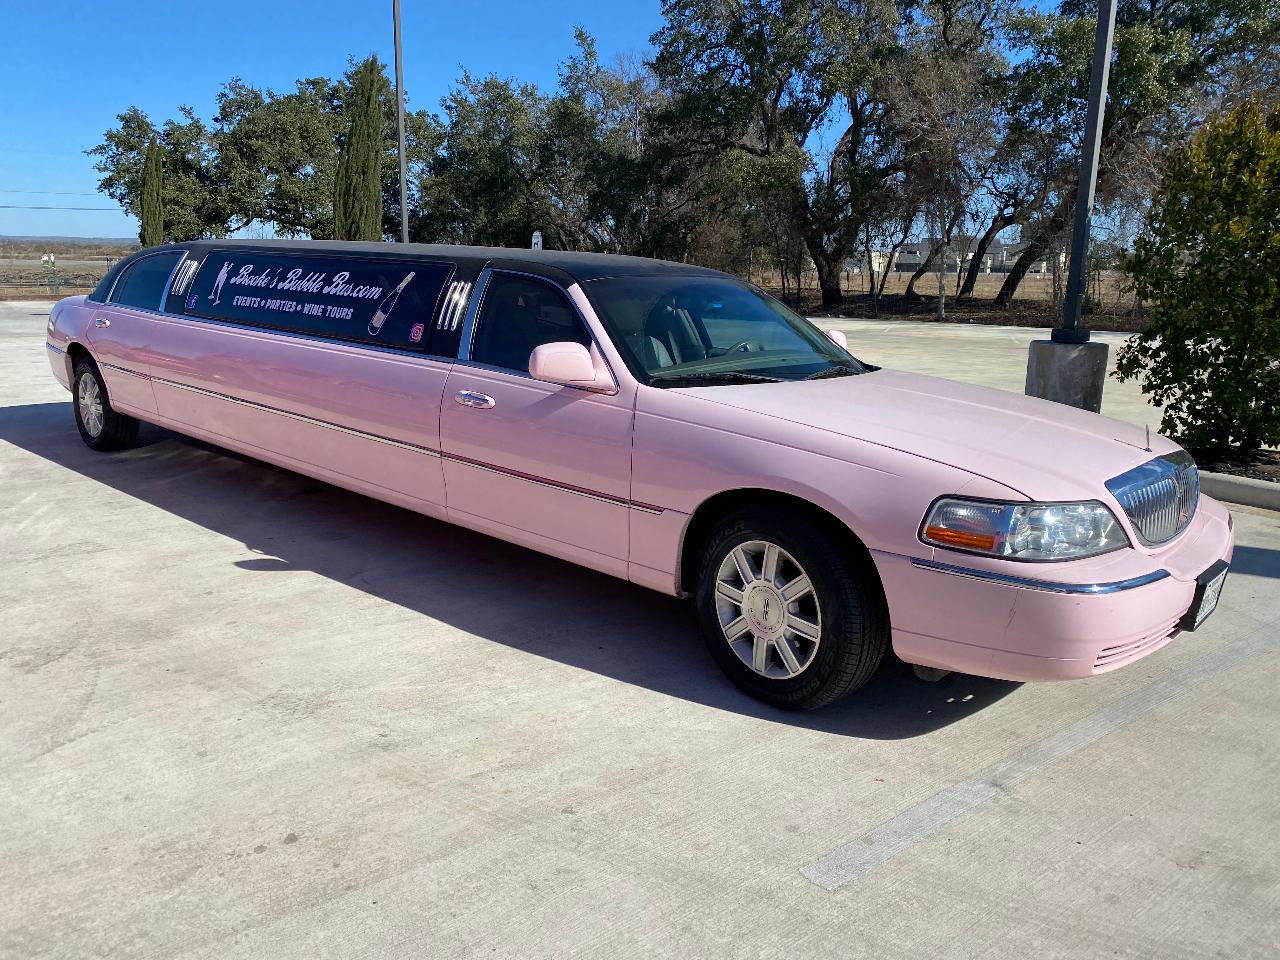 PINK LINCOLN LIMO WINE TOUR (PRIVATE) Brooke's Bubble Bus Reservations